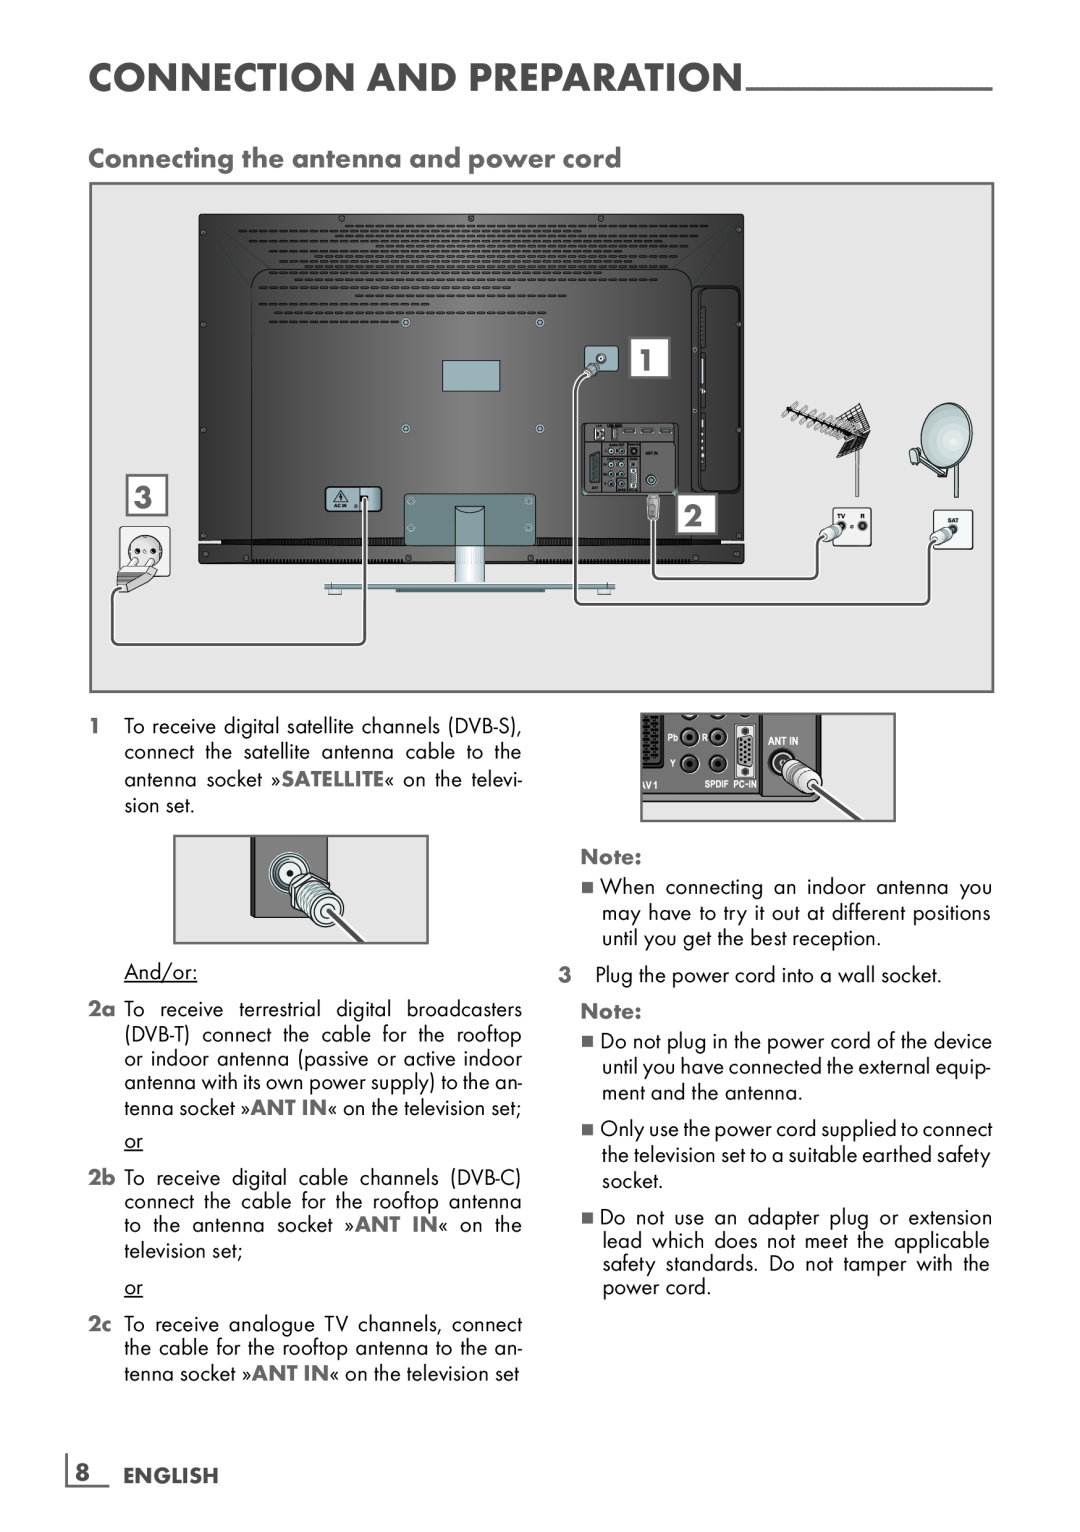 Grundig 40 VLE 8130 BG manual Connecting the antenna and power cord, Connection and preparation, ­8 ENGLISH 